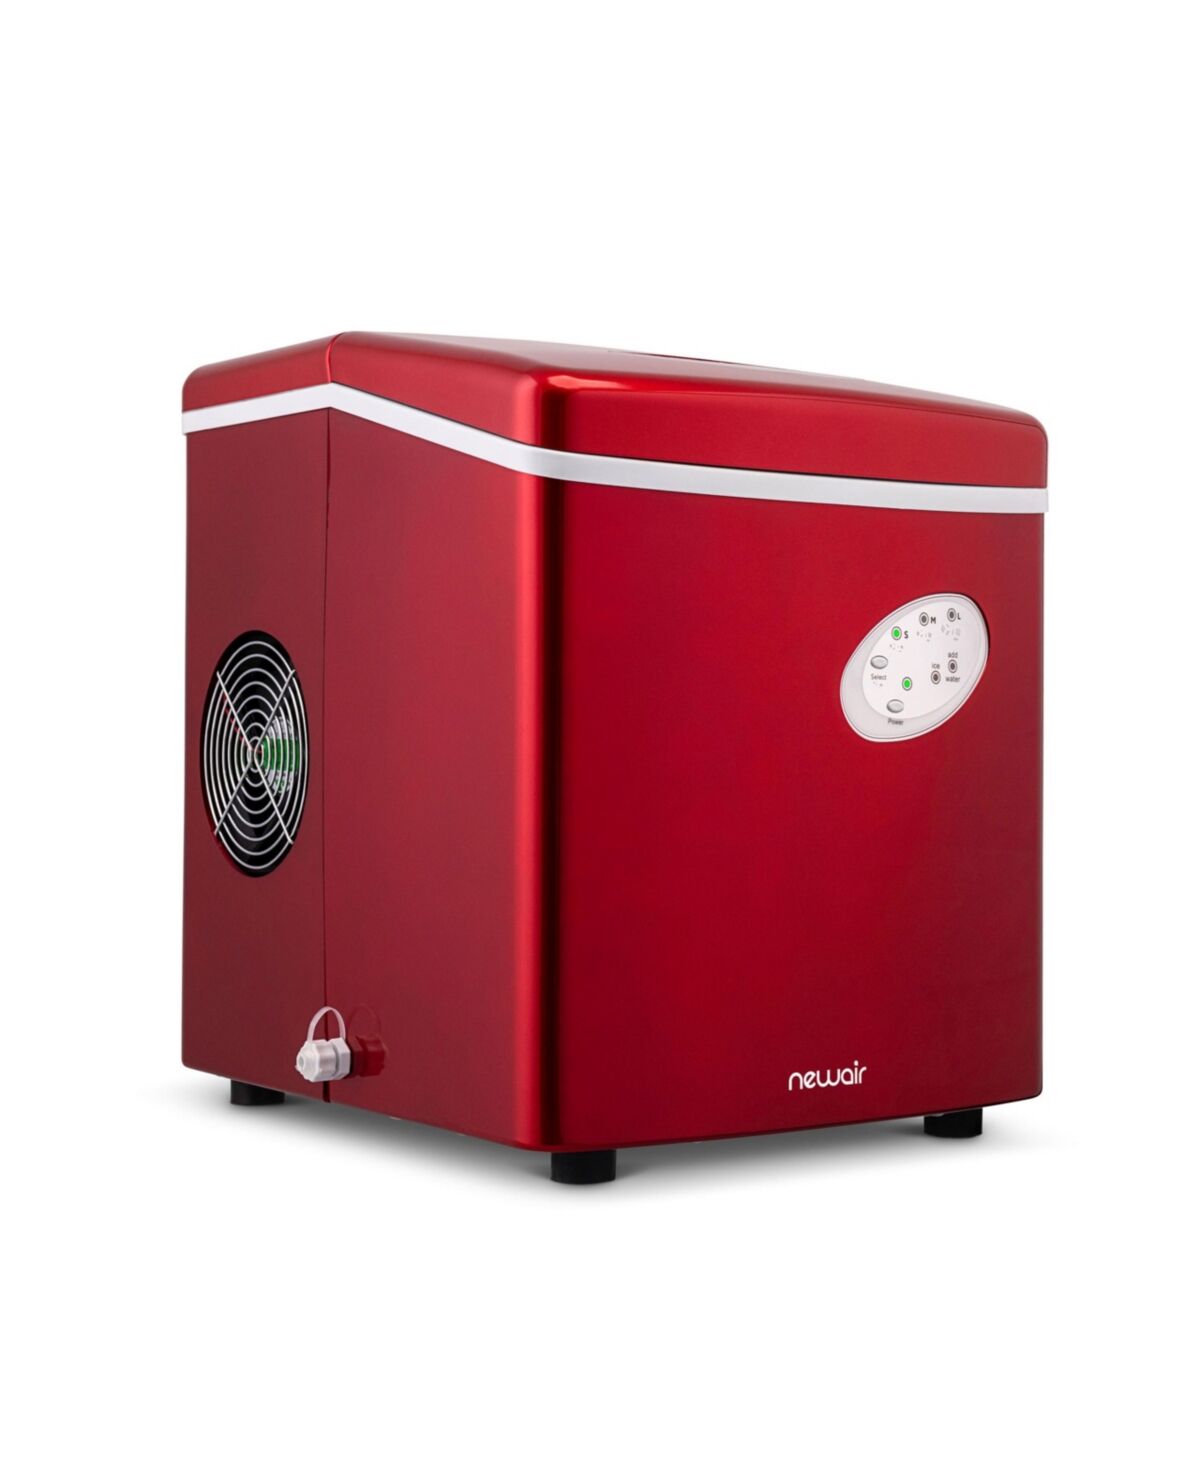 Newair Countertop Ice Maker, 28 lbs. of Ice a Day, 3 Ice Sizes, Bpa-Free Parts - Red